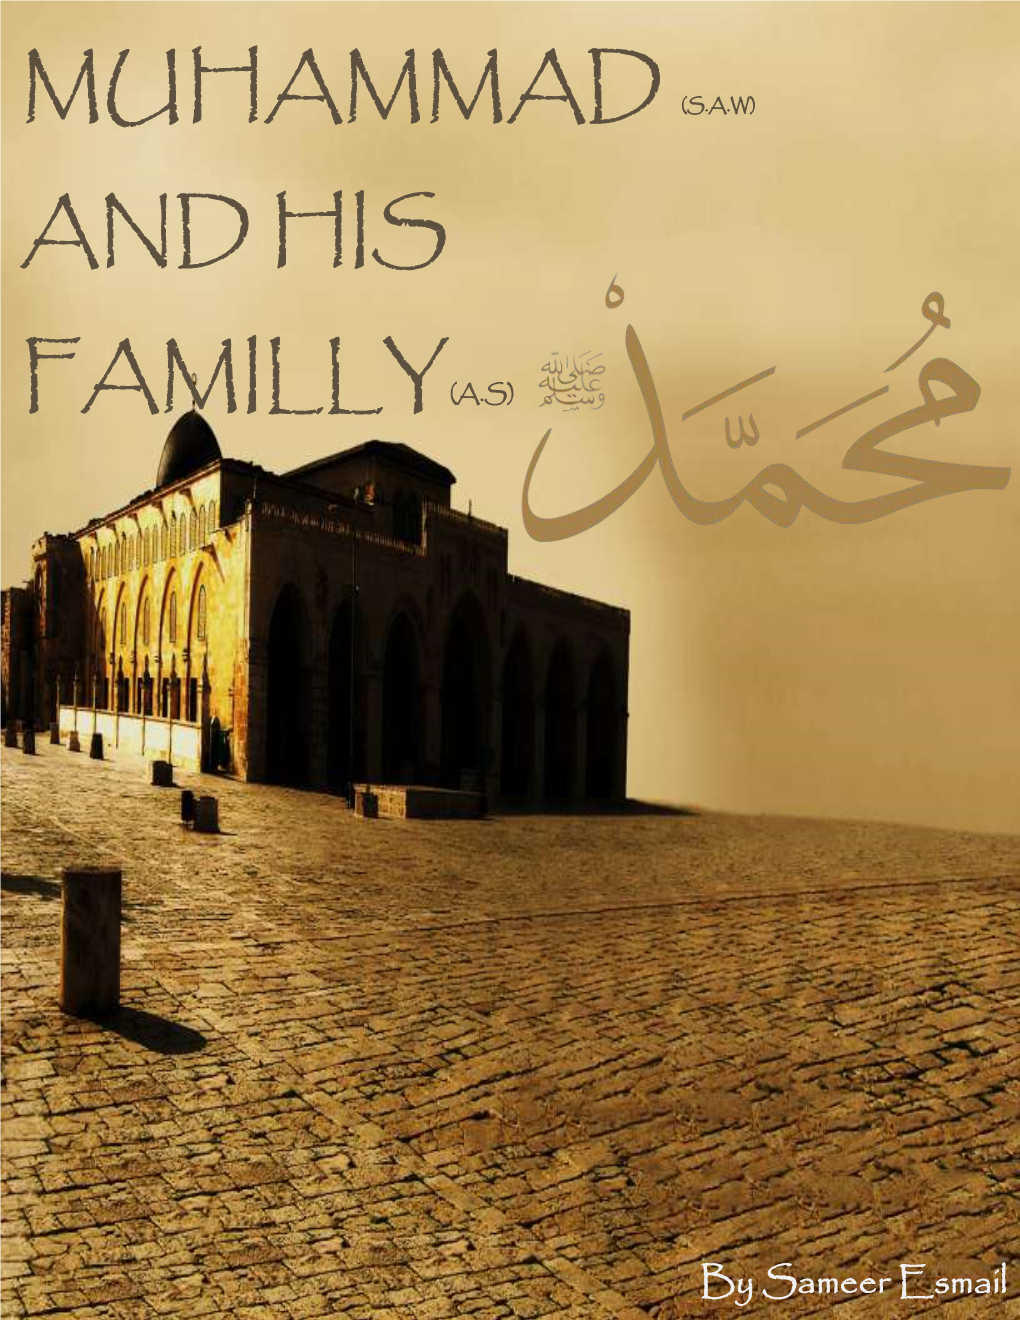 Muhammad (S.A.W) and His Familly(A.S)